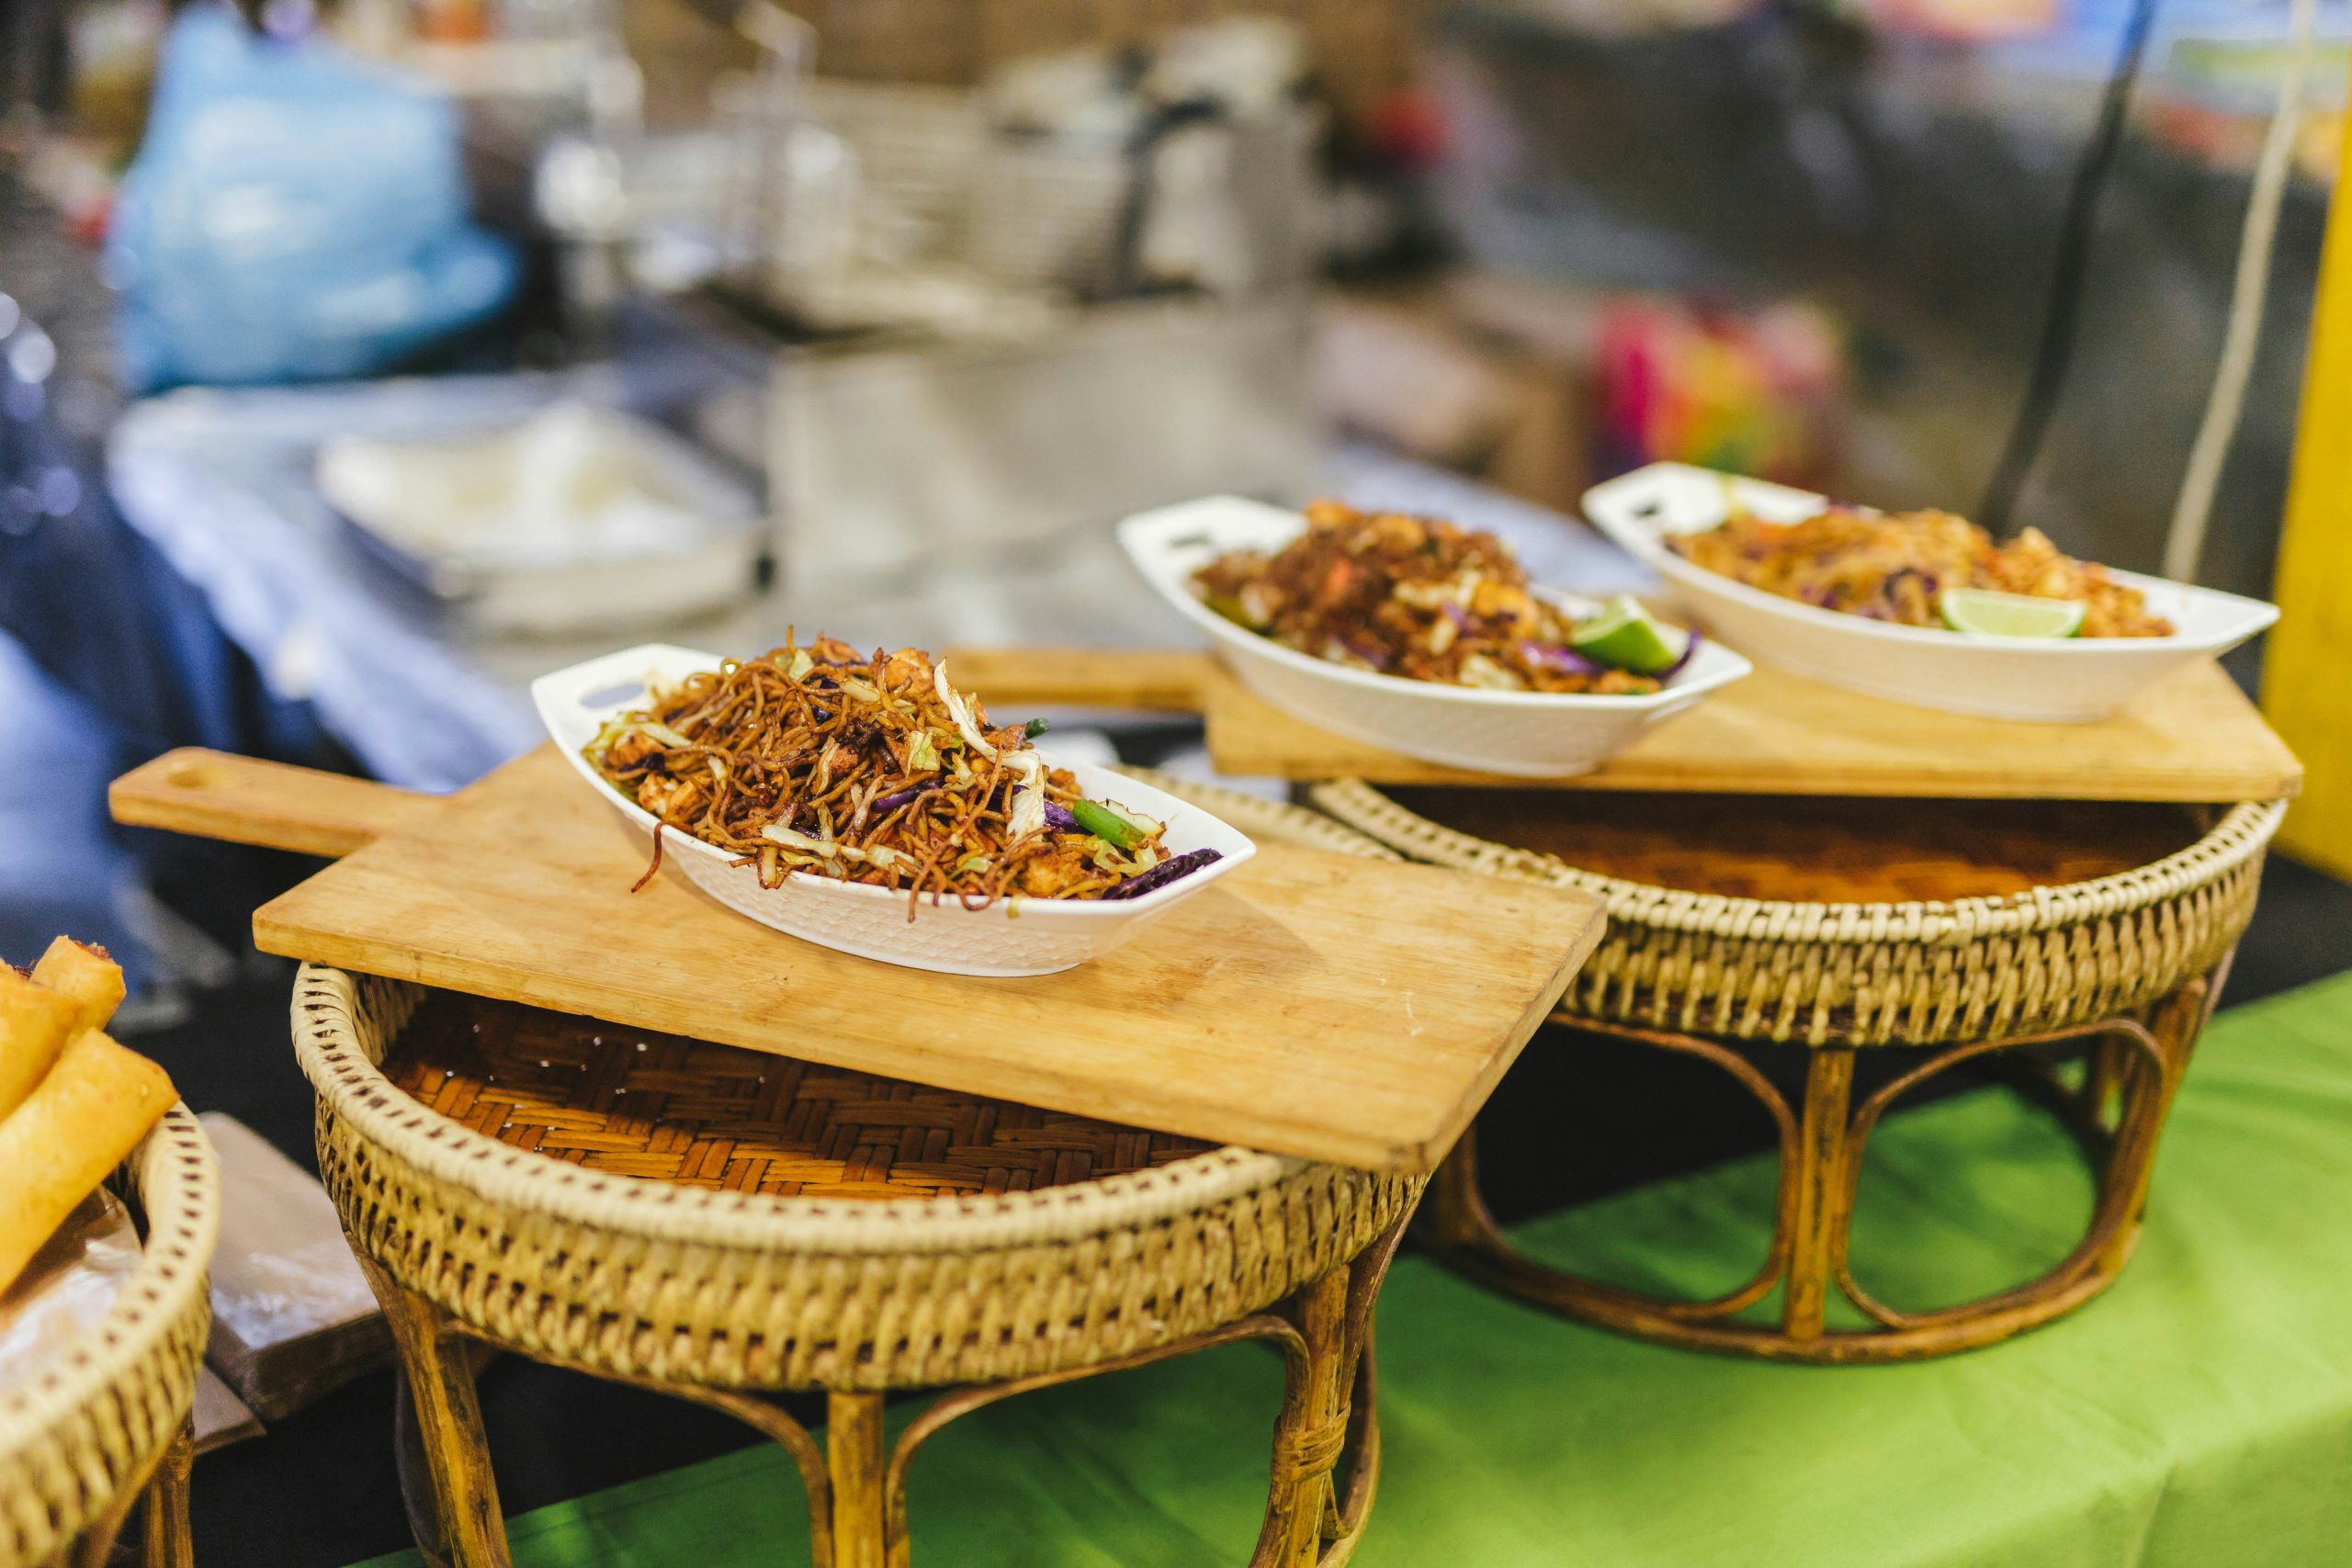 A noodle dish available at the market